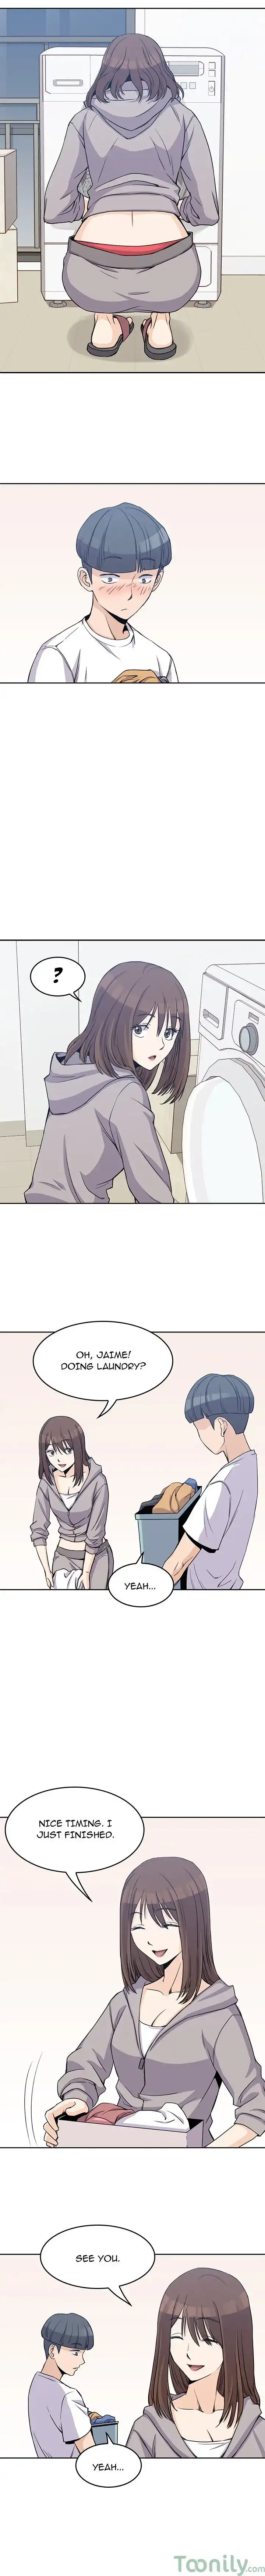 Boys are Boys - Chapter 1 Page 12